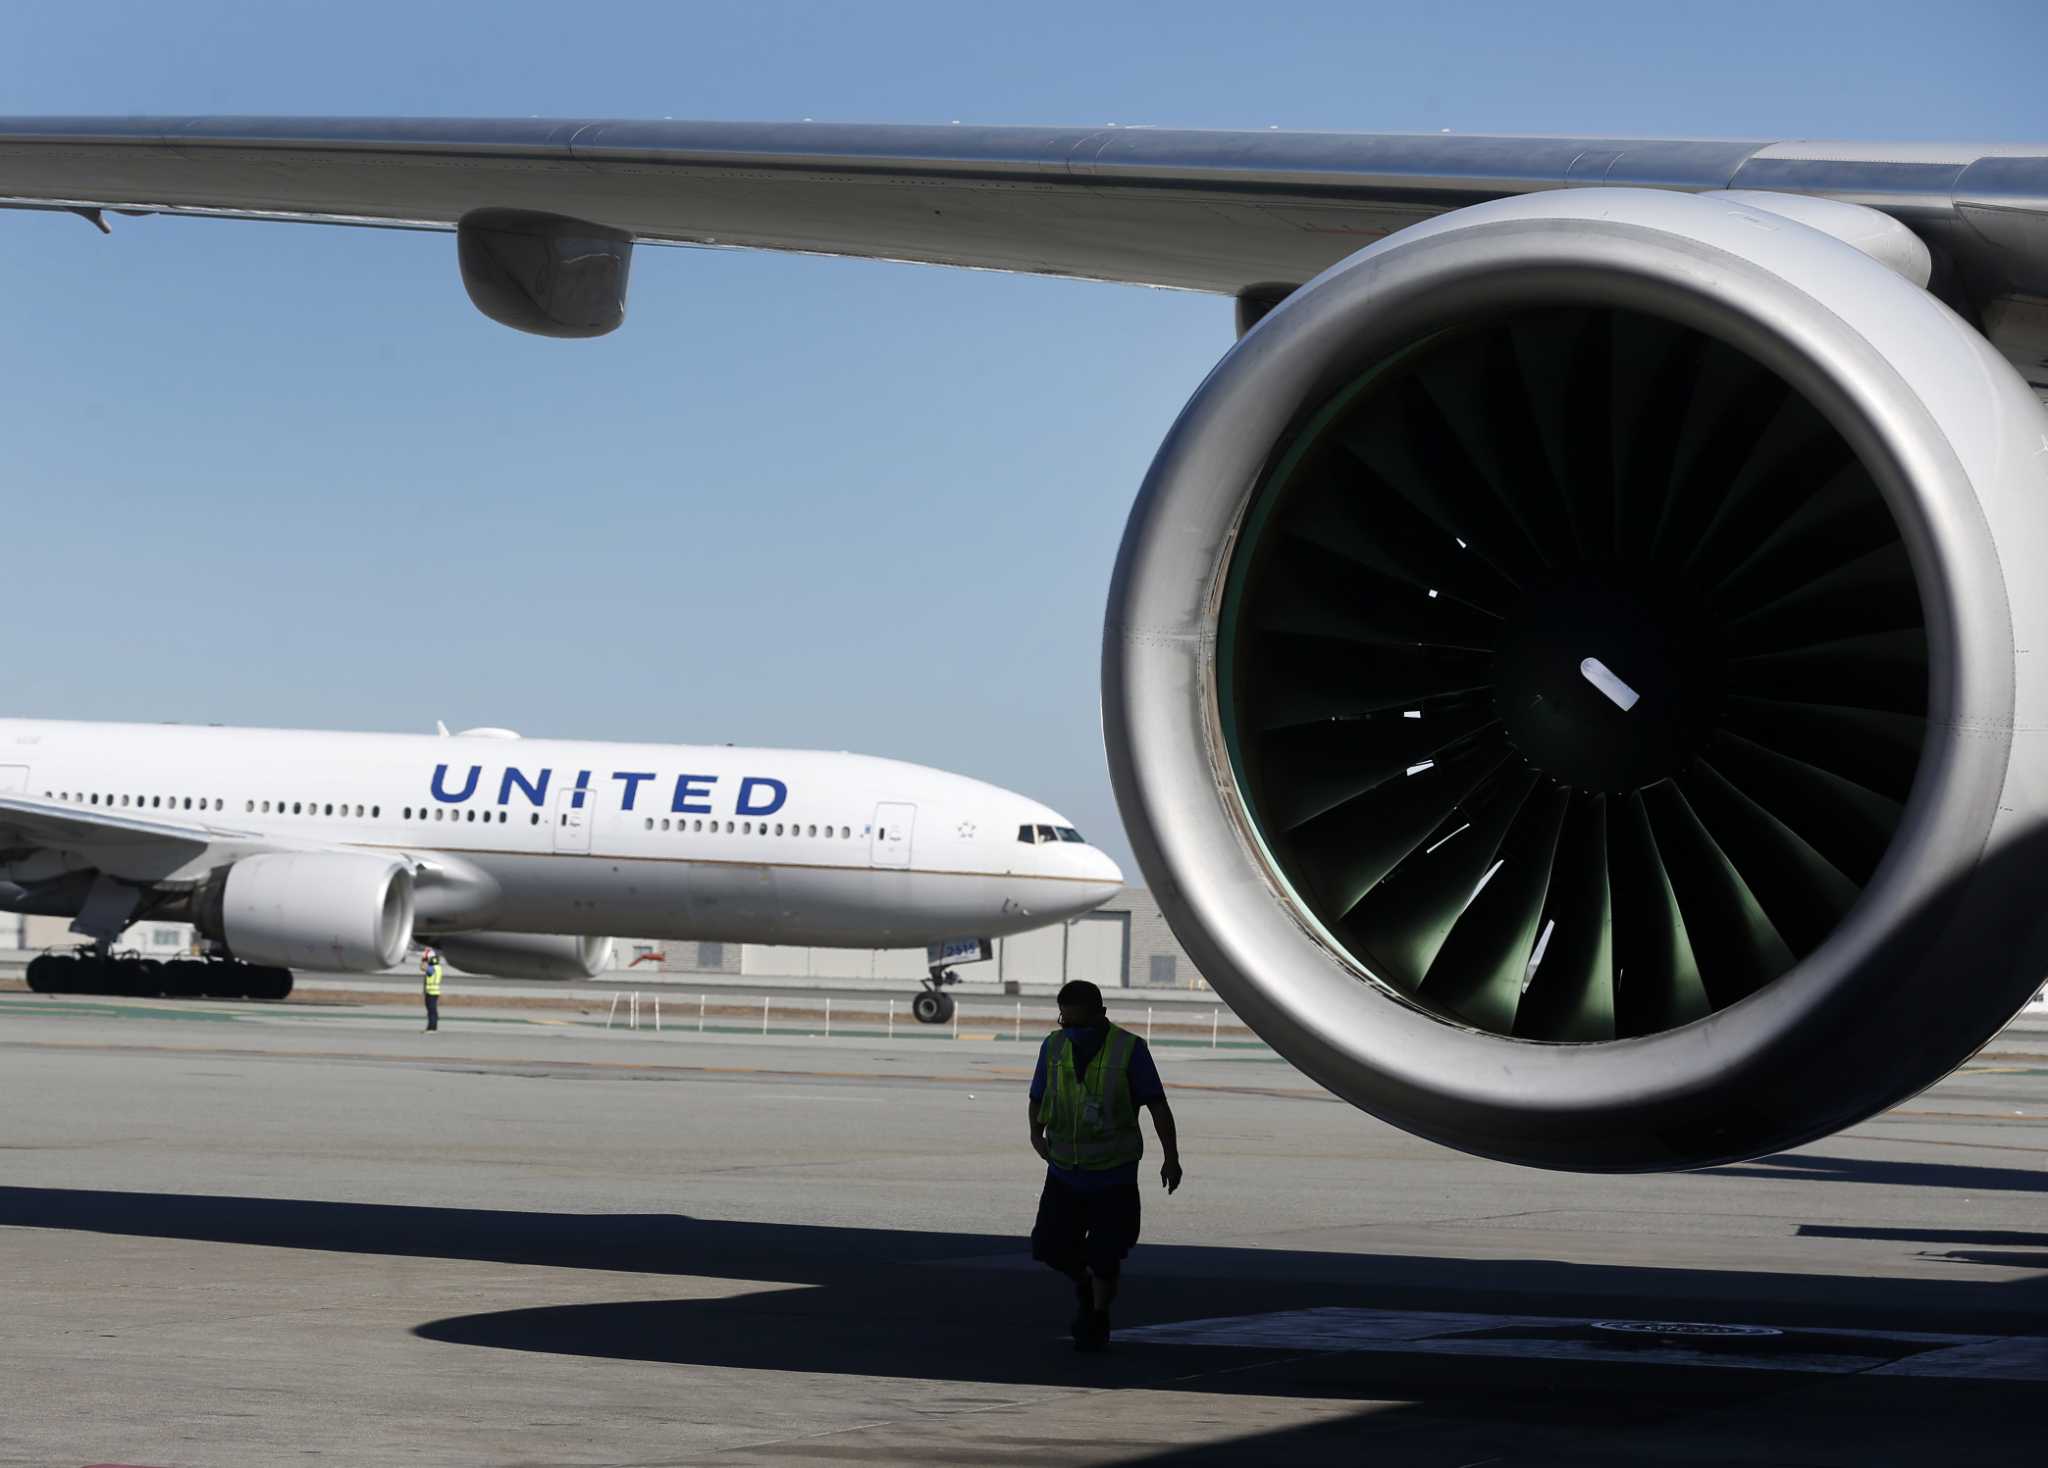 UA35: United flight from SFO to Japan loses tire during takeoff